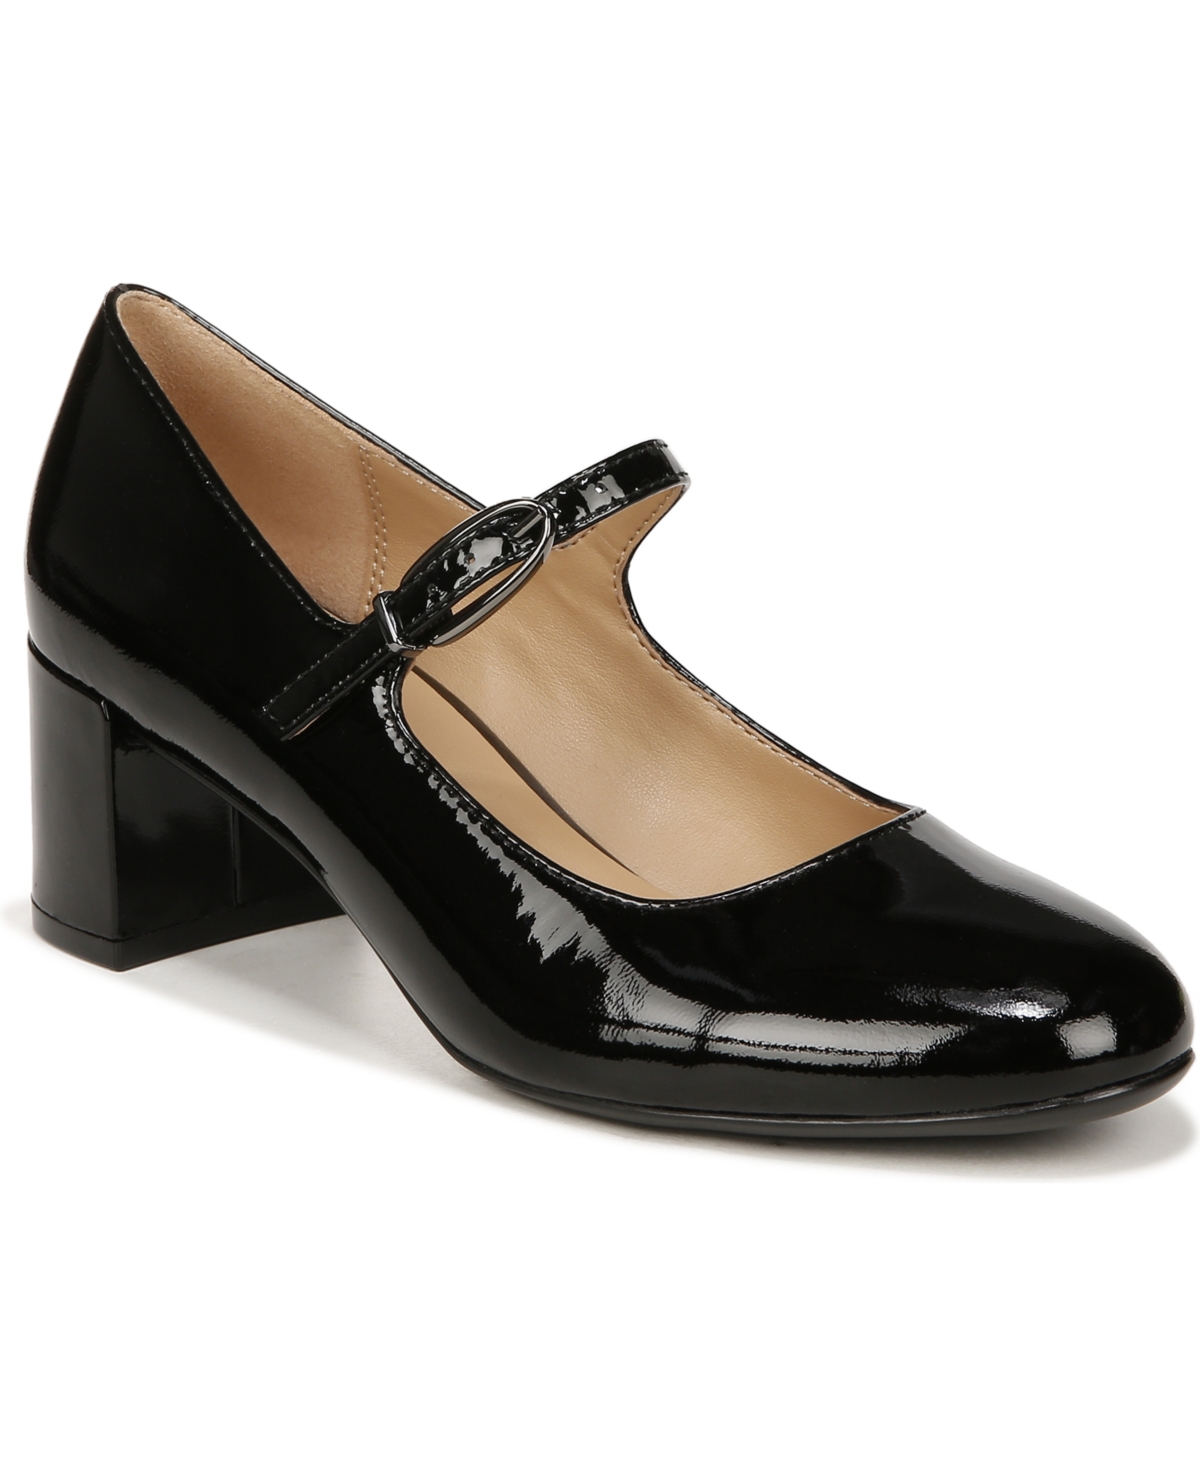 Renny Mary Jane Pumps - Black Patent Leather